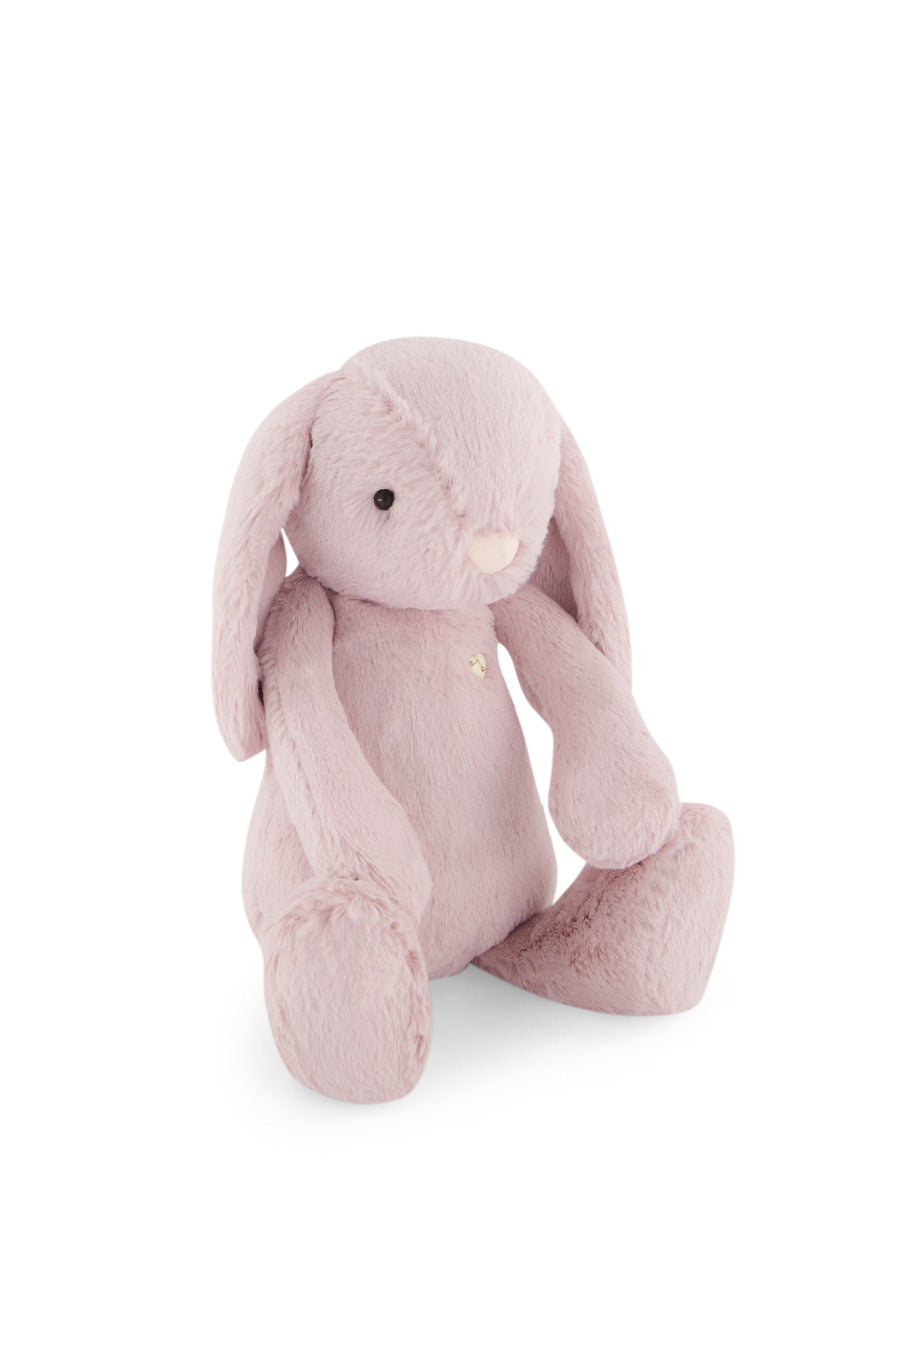 Snuggle Bunnies - Penelope the Bunny - Blossom Childrens Toy from Jamie Kay USA